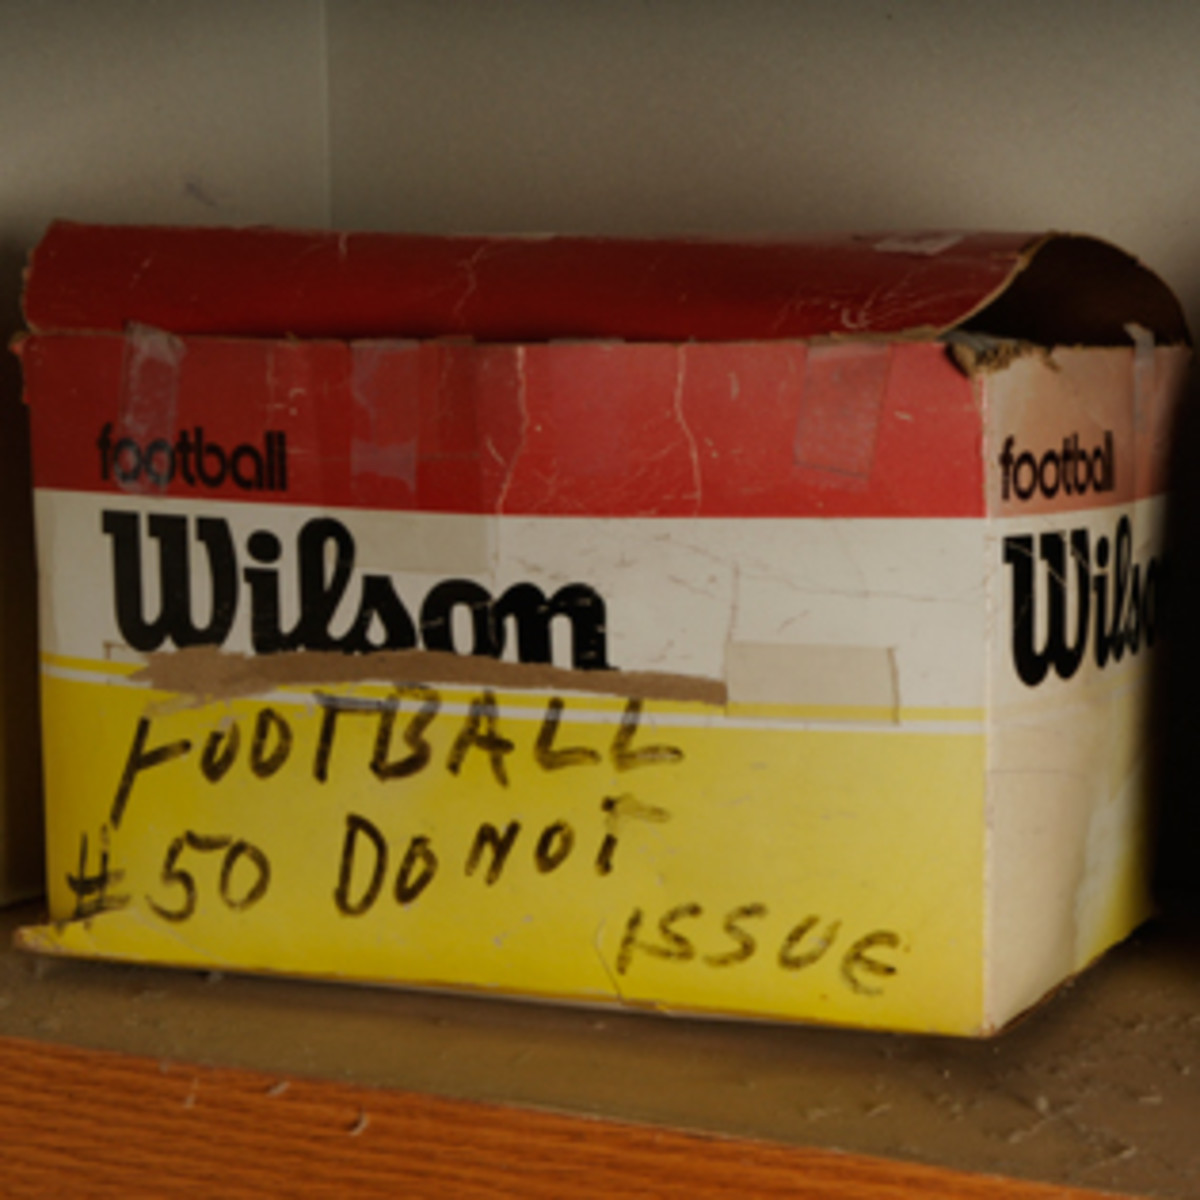 The box was kept closed for 48 years before Williams College discovered it contained more than just another set of jerseys.